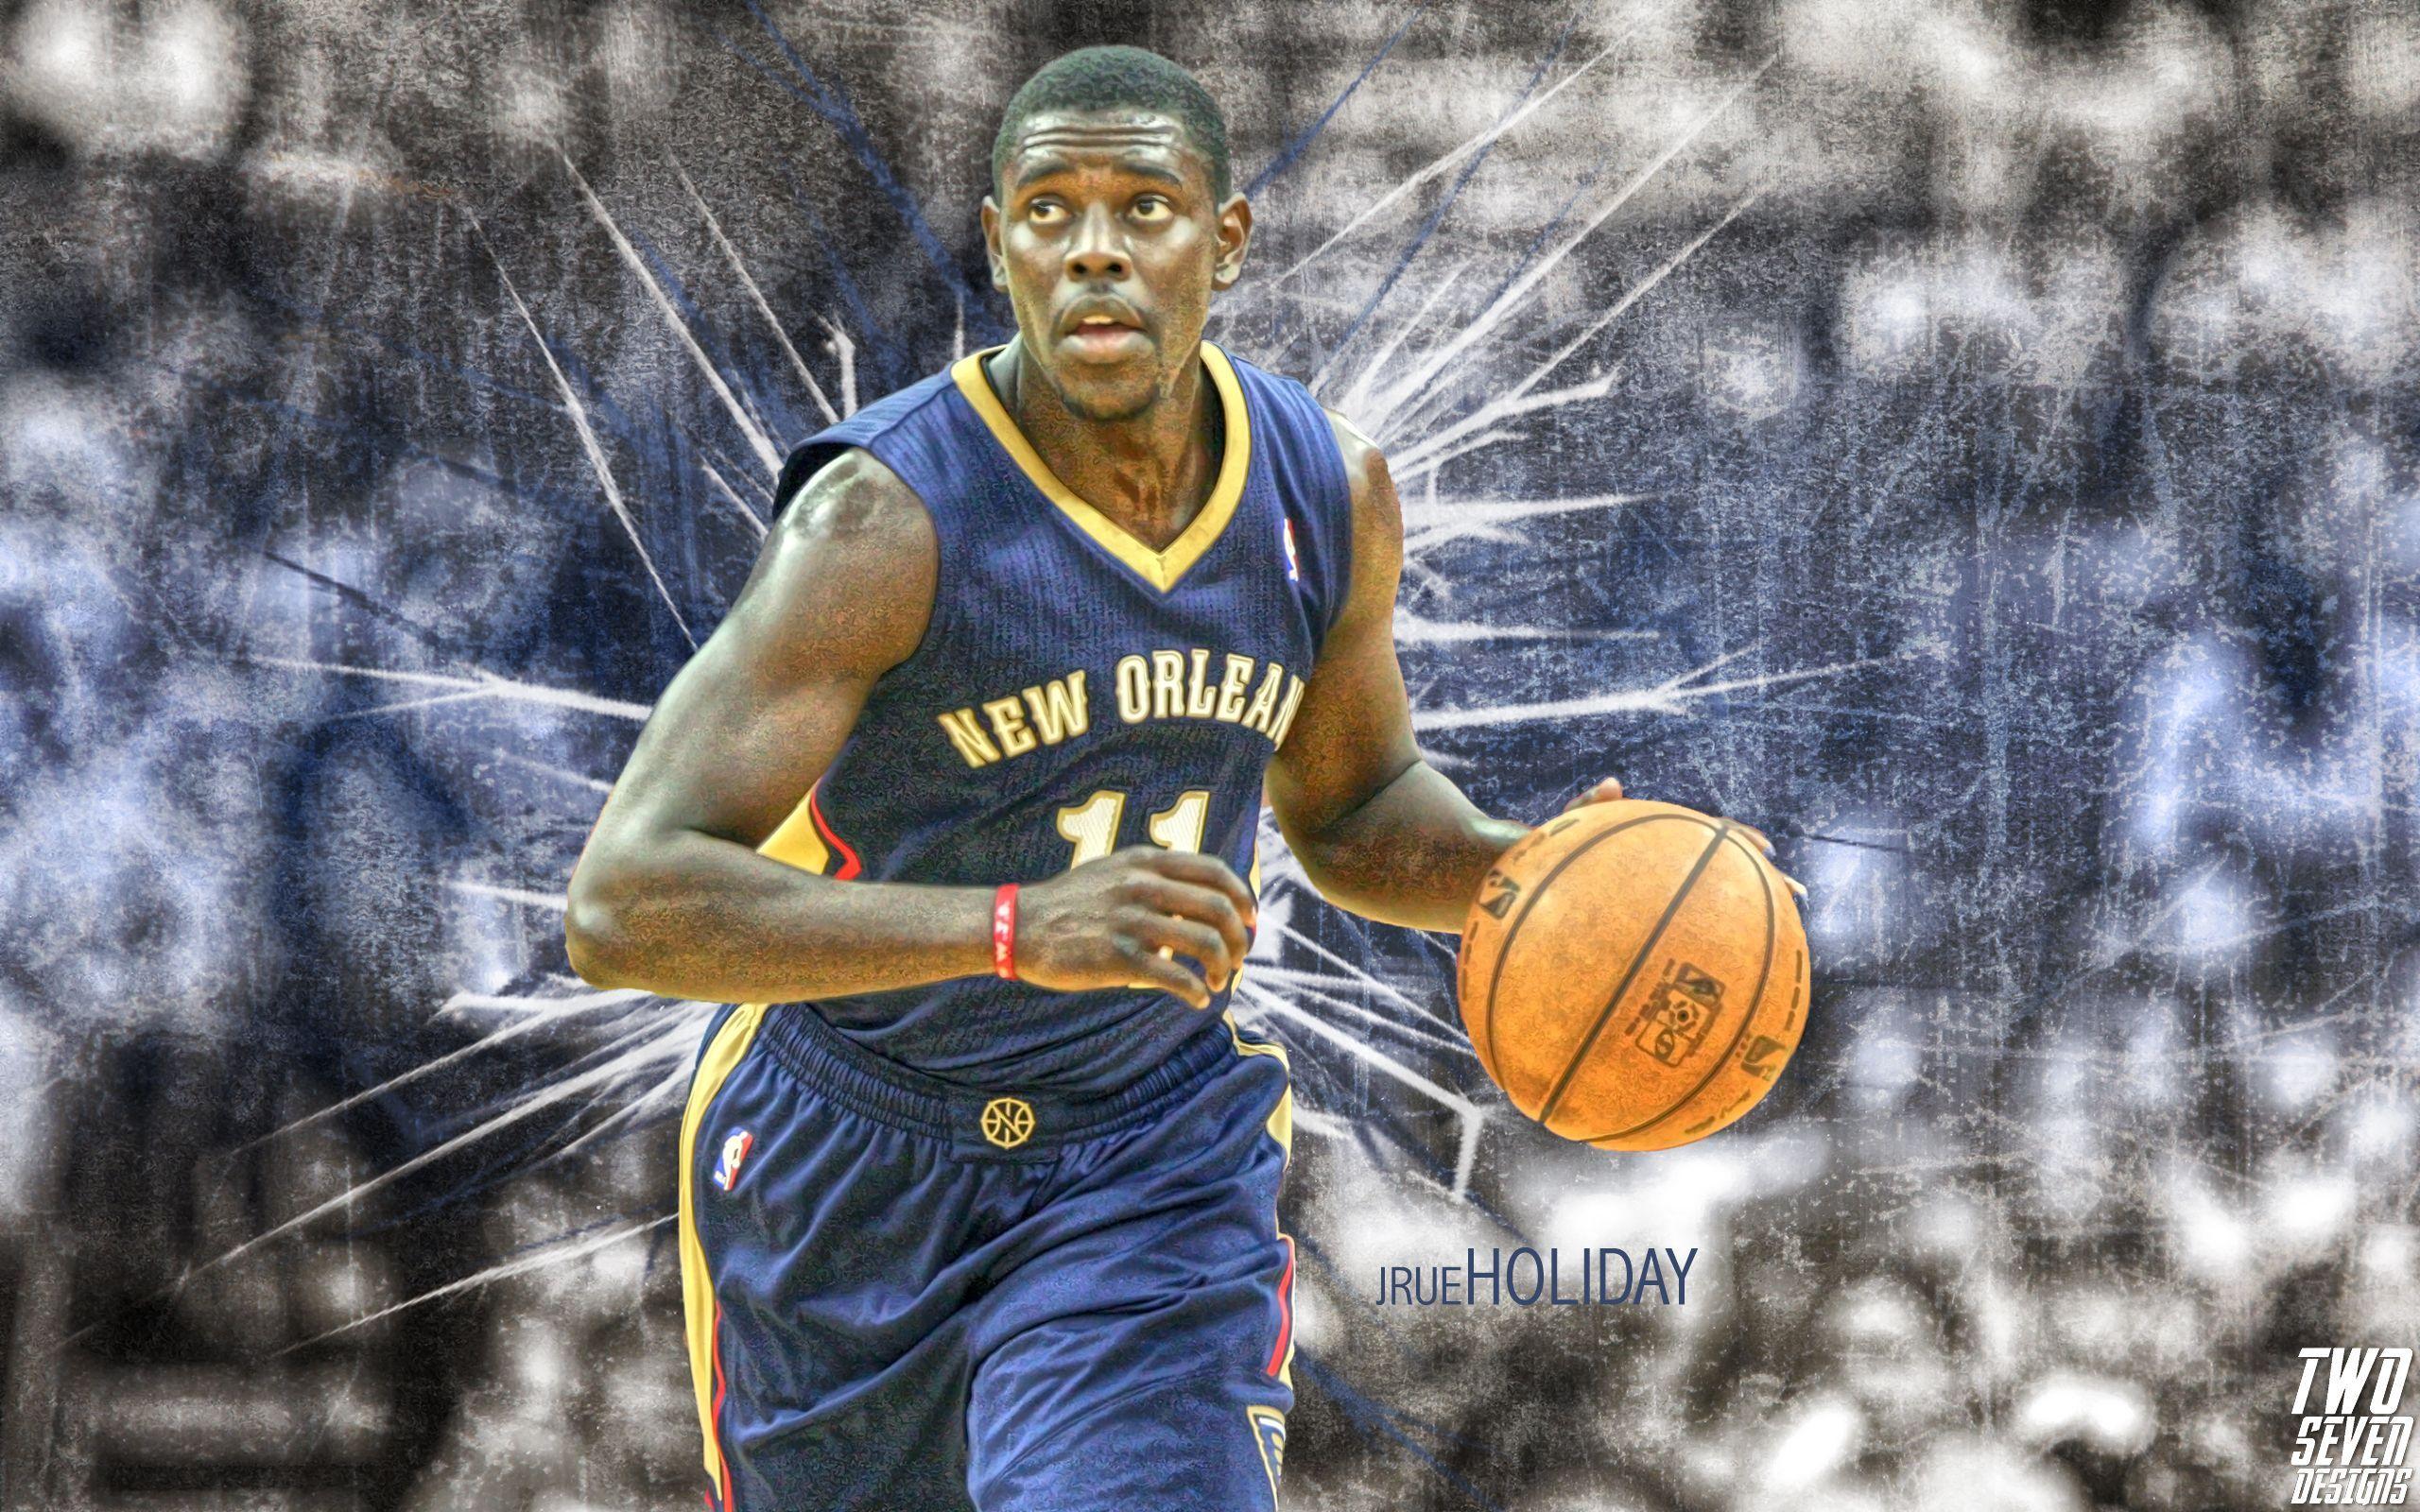 New Orleans Pelicans. Jrue Holiday. New Orleans Pelicans